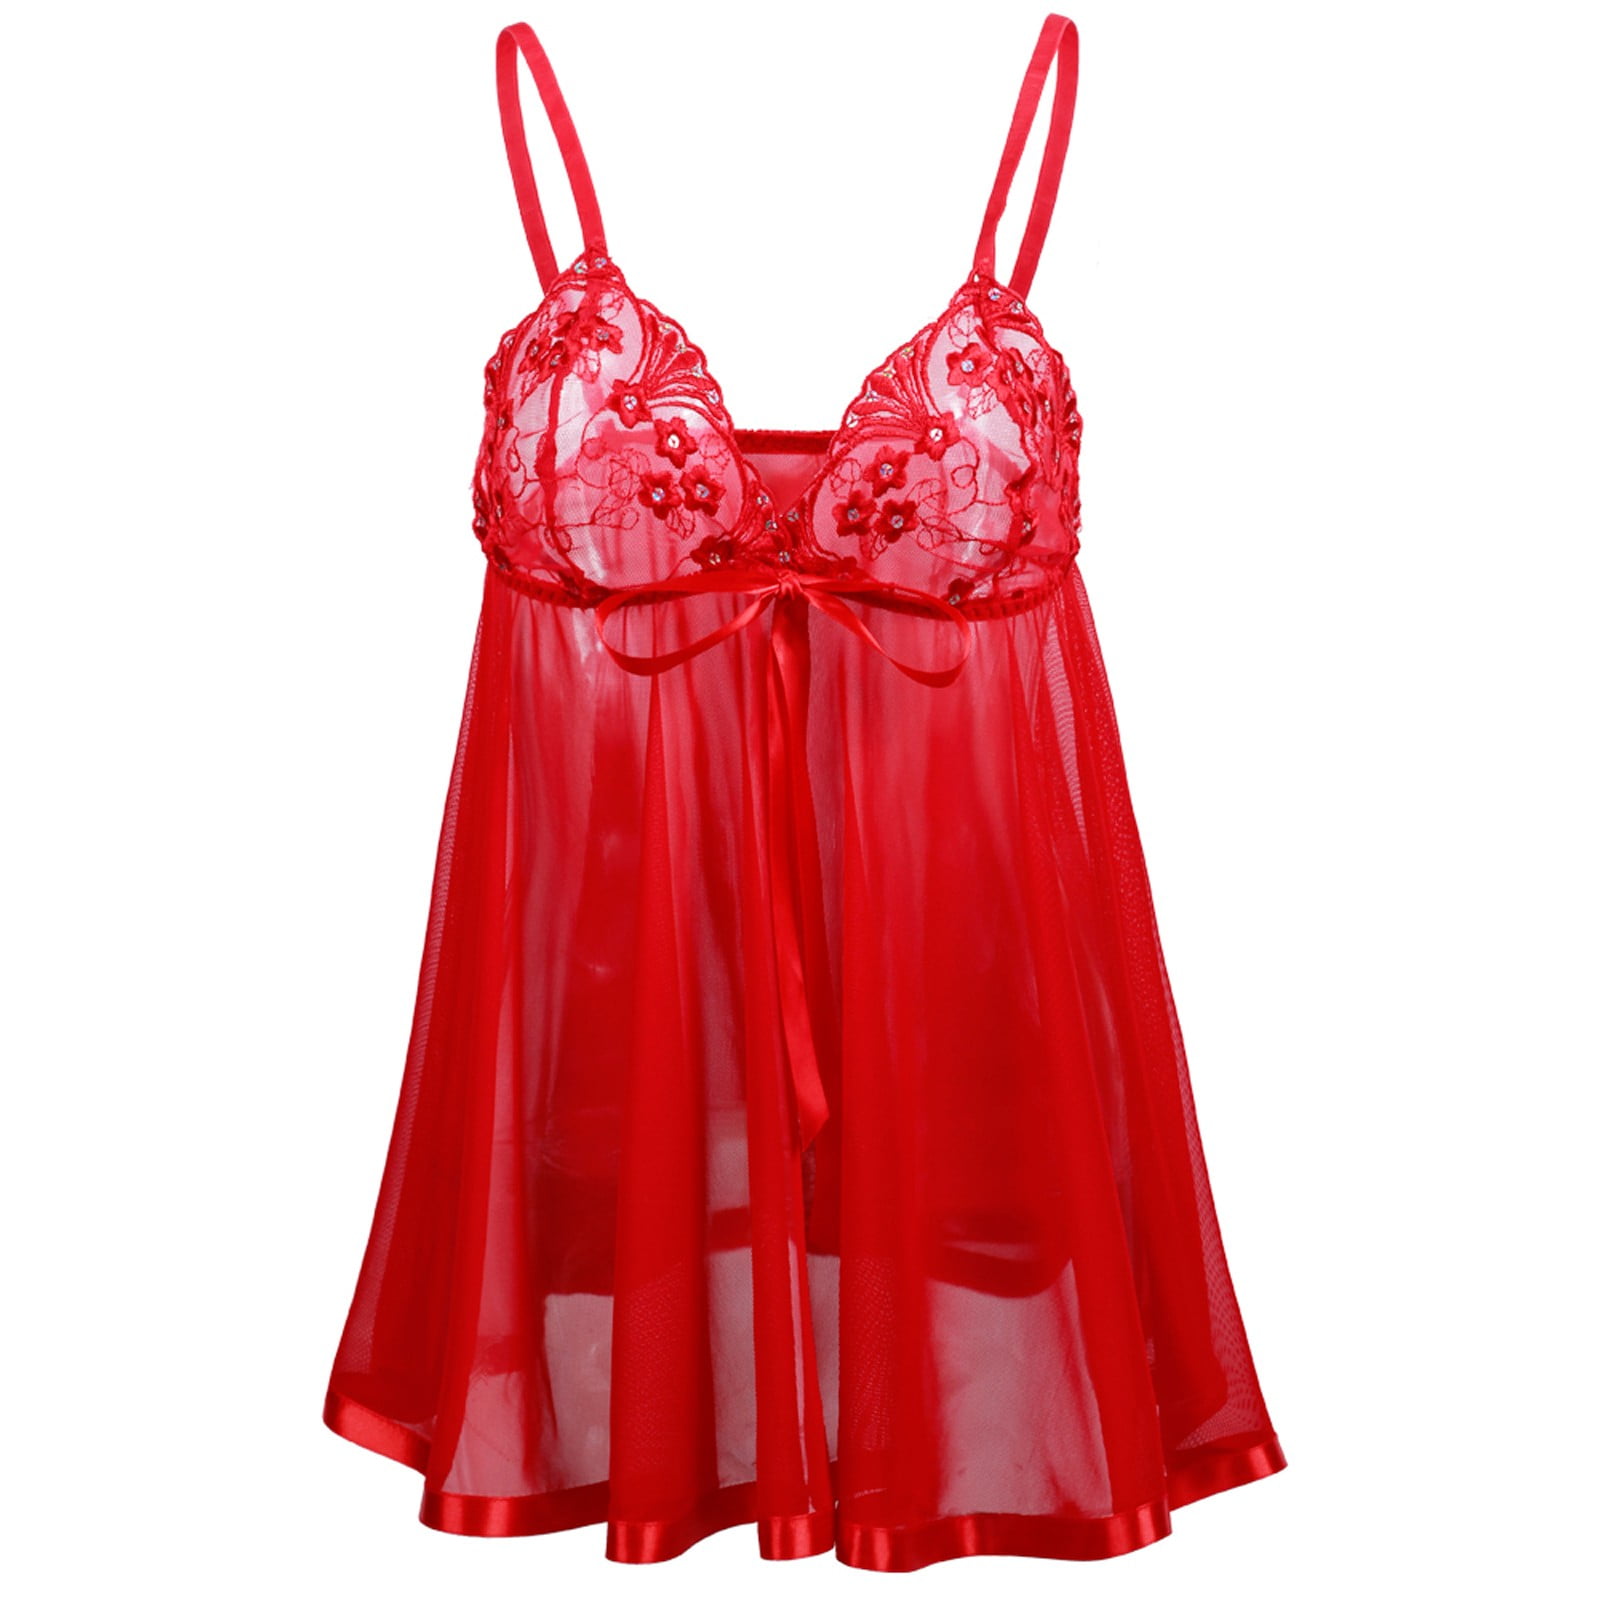 adviicd Nightgown With Built In Bra Lingerie for Women Lace